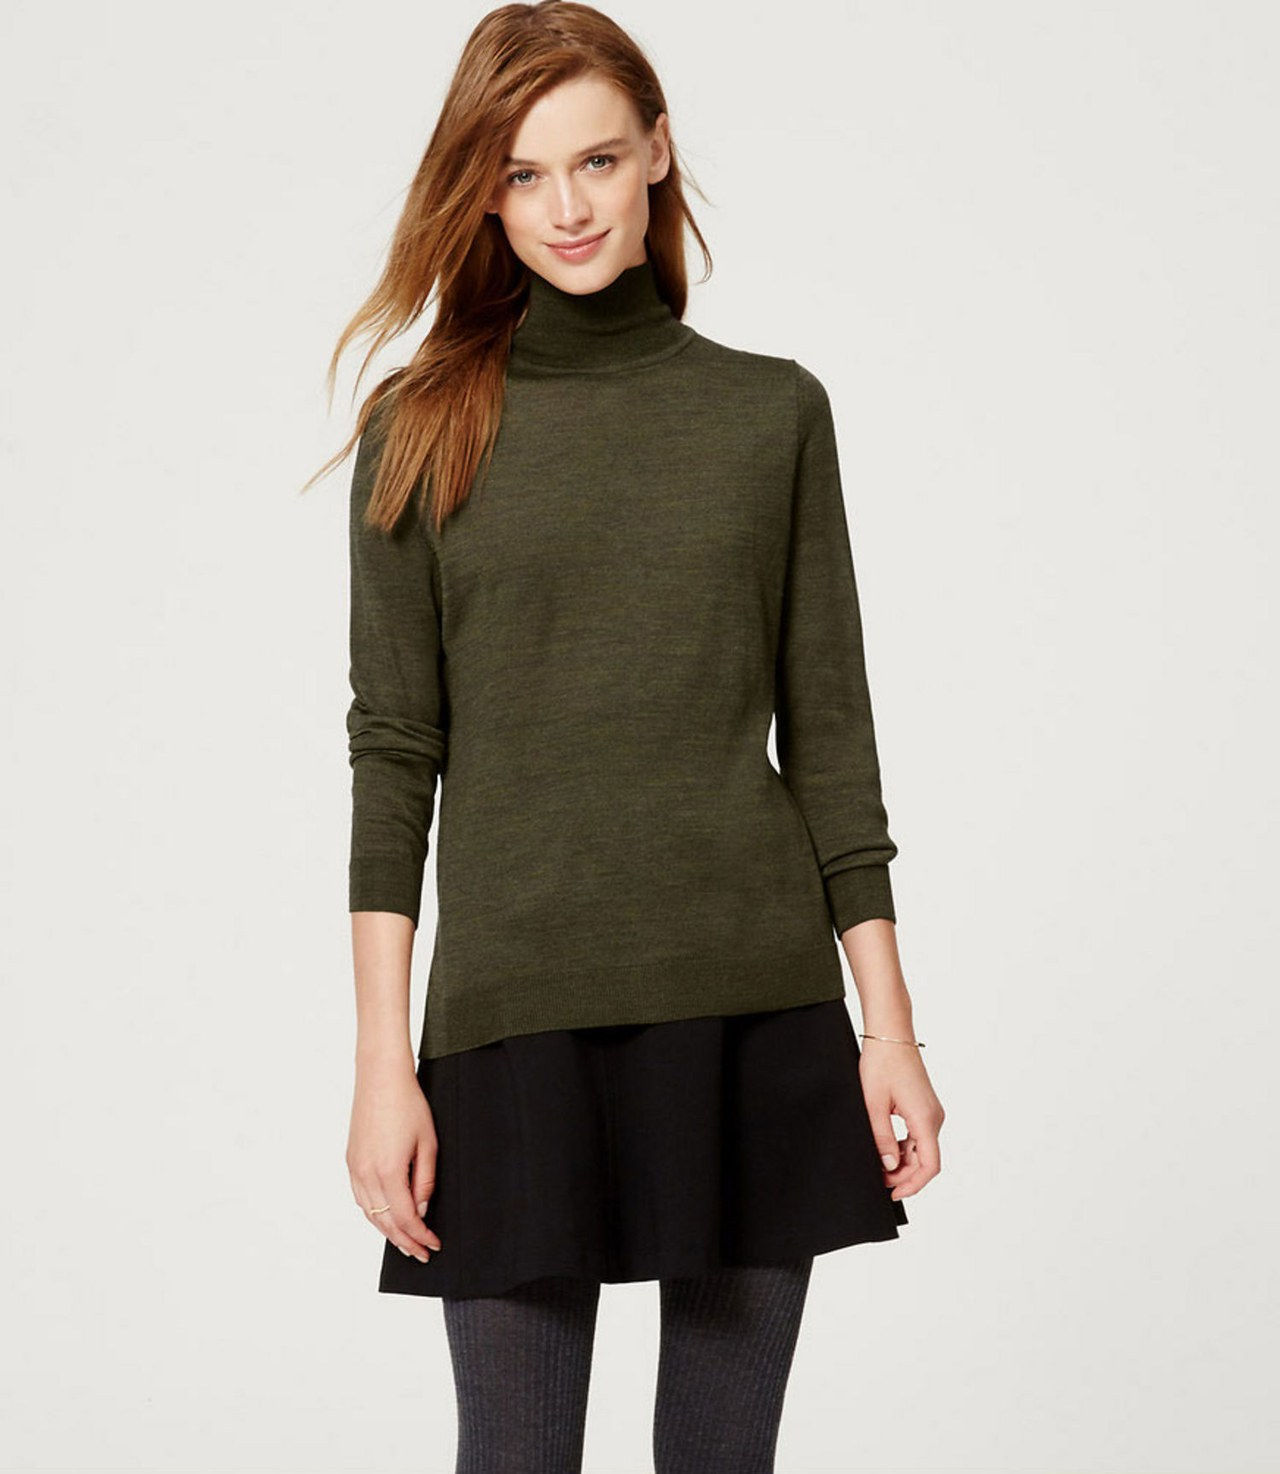 loft turtleneck outfit rory gilmore